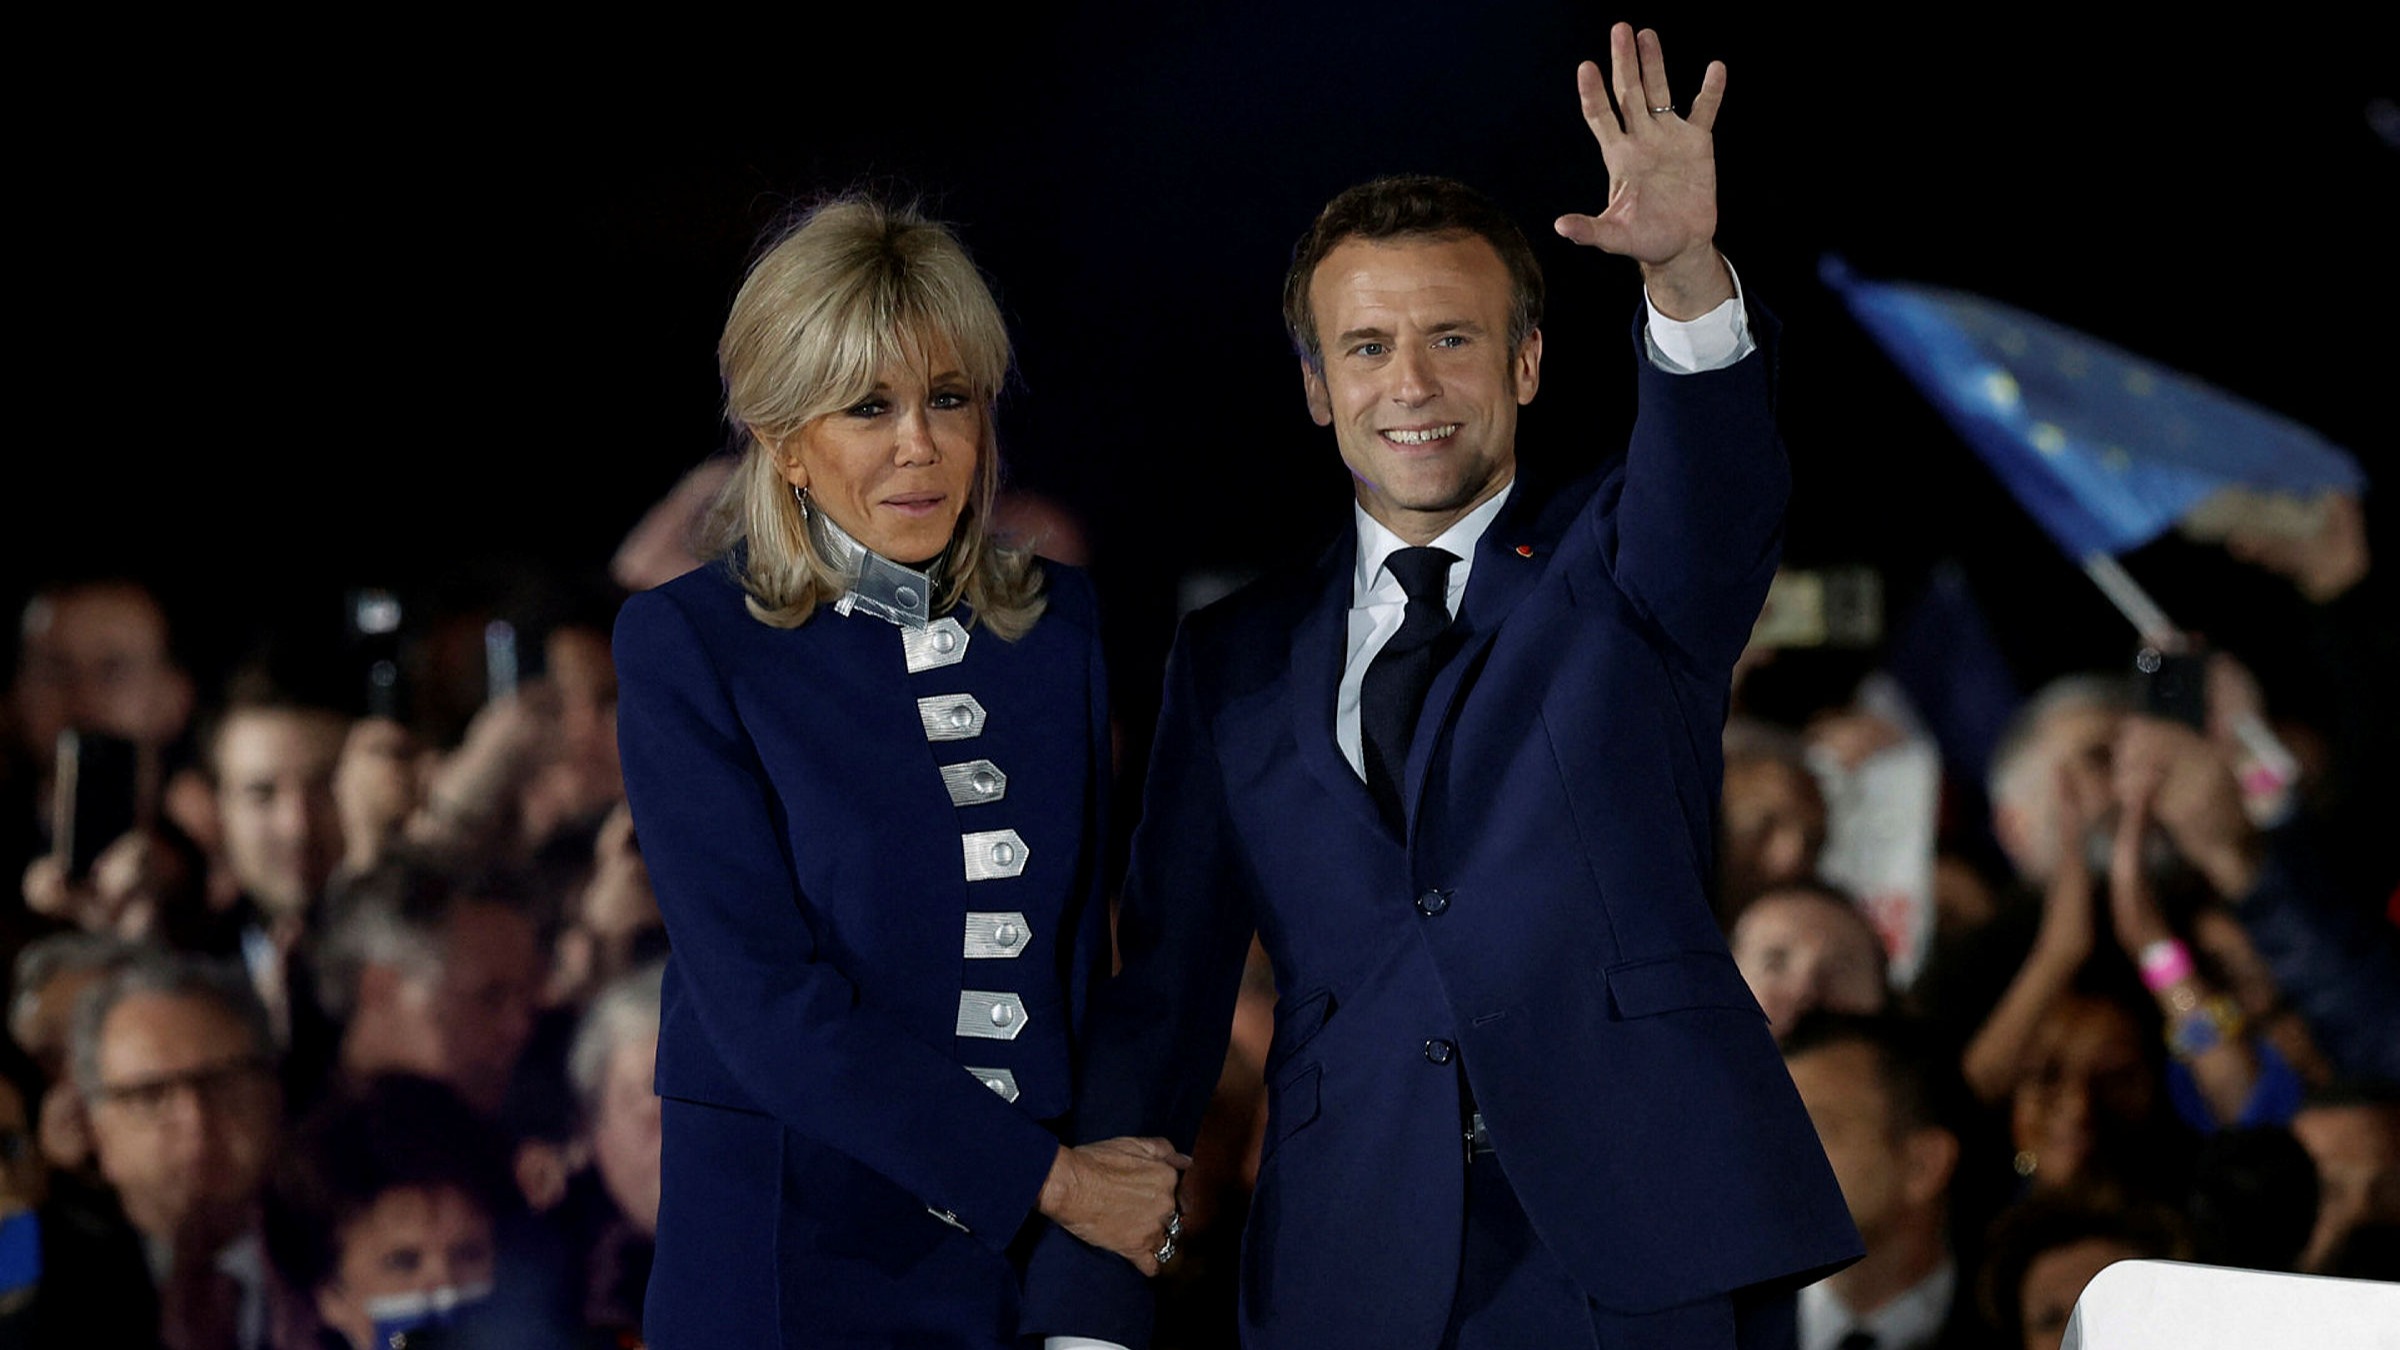 Emmanuel Macron defeats Marine Le Pen to be re-elected French president |  Financial Times